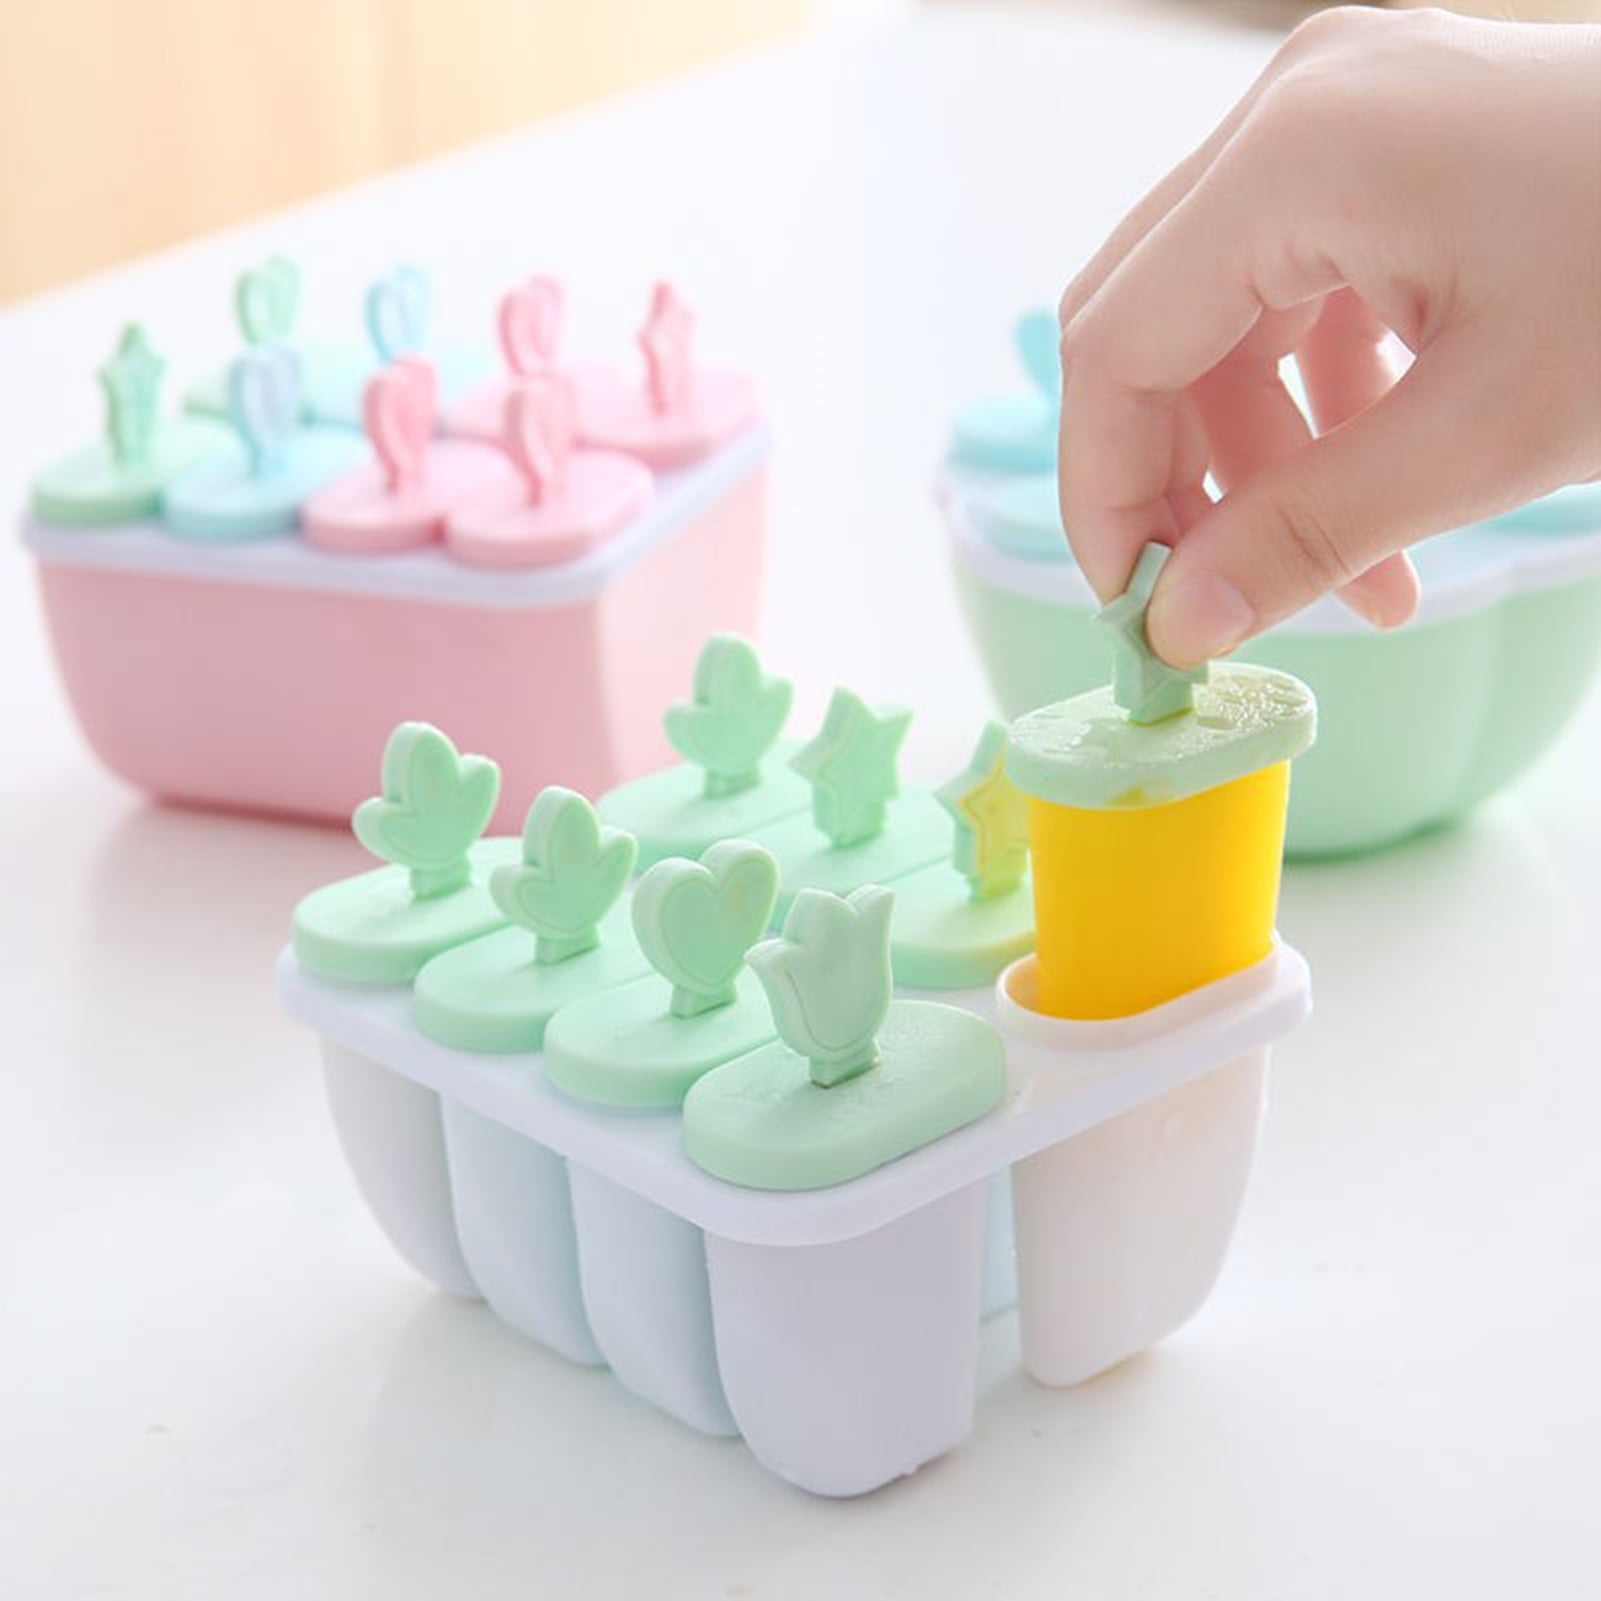  Set of 8 Silicone Ice Cream Mould 4 Cavity Ice Lolly Mold  Reusable Oval Cake Pop Molds Cakesicles Mold Baking Molds with 200 Pieces  Wooden Sticks for DIY Making Ice Candy